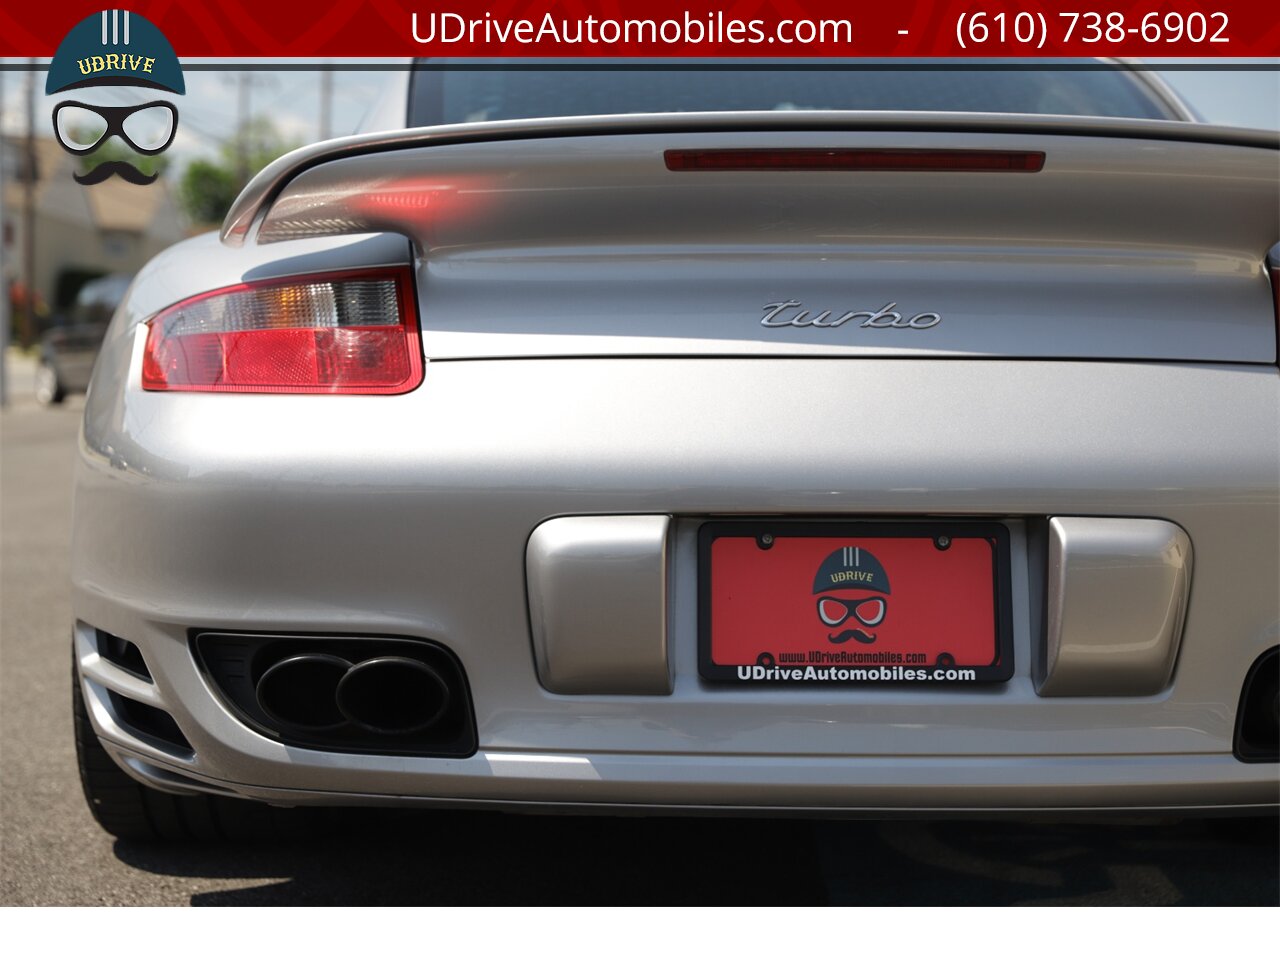 2008 Porsche 911 6 Speed Manual Turbo 997 PCCB's $149k MSRP   - Photo 21 - West Chester, PA 19382